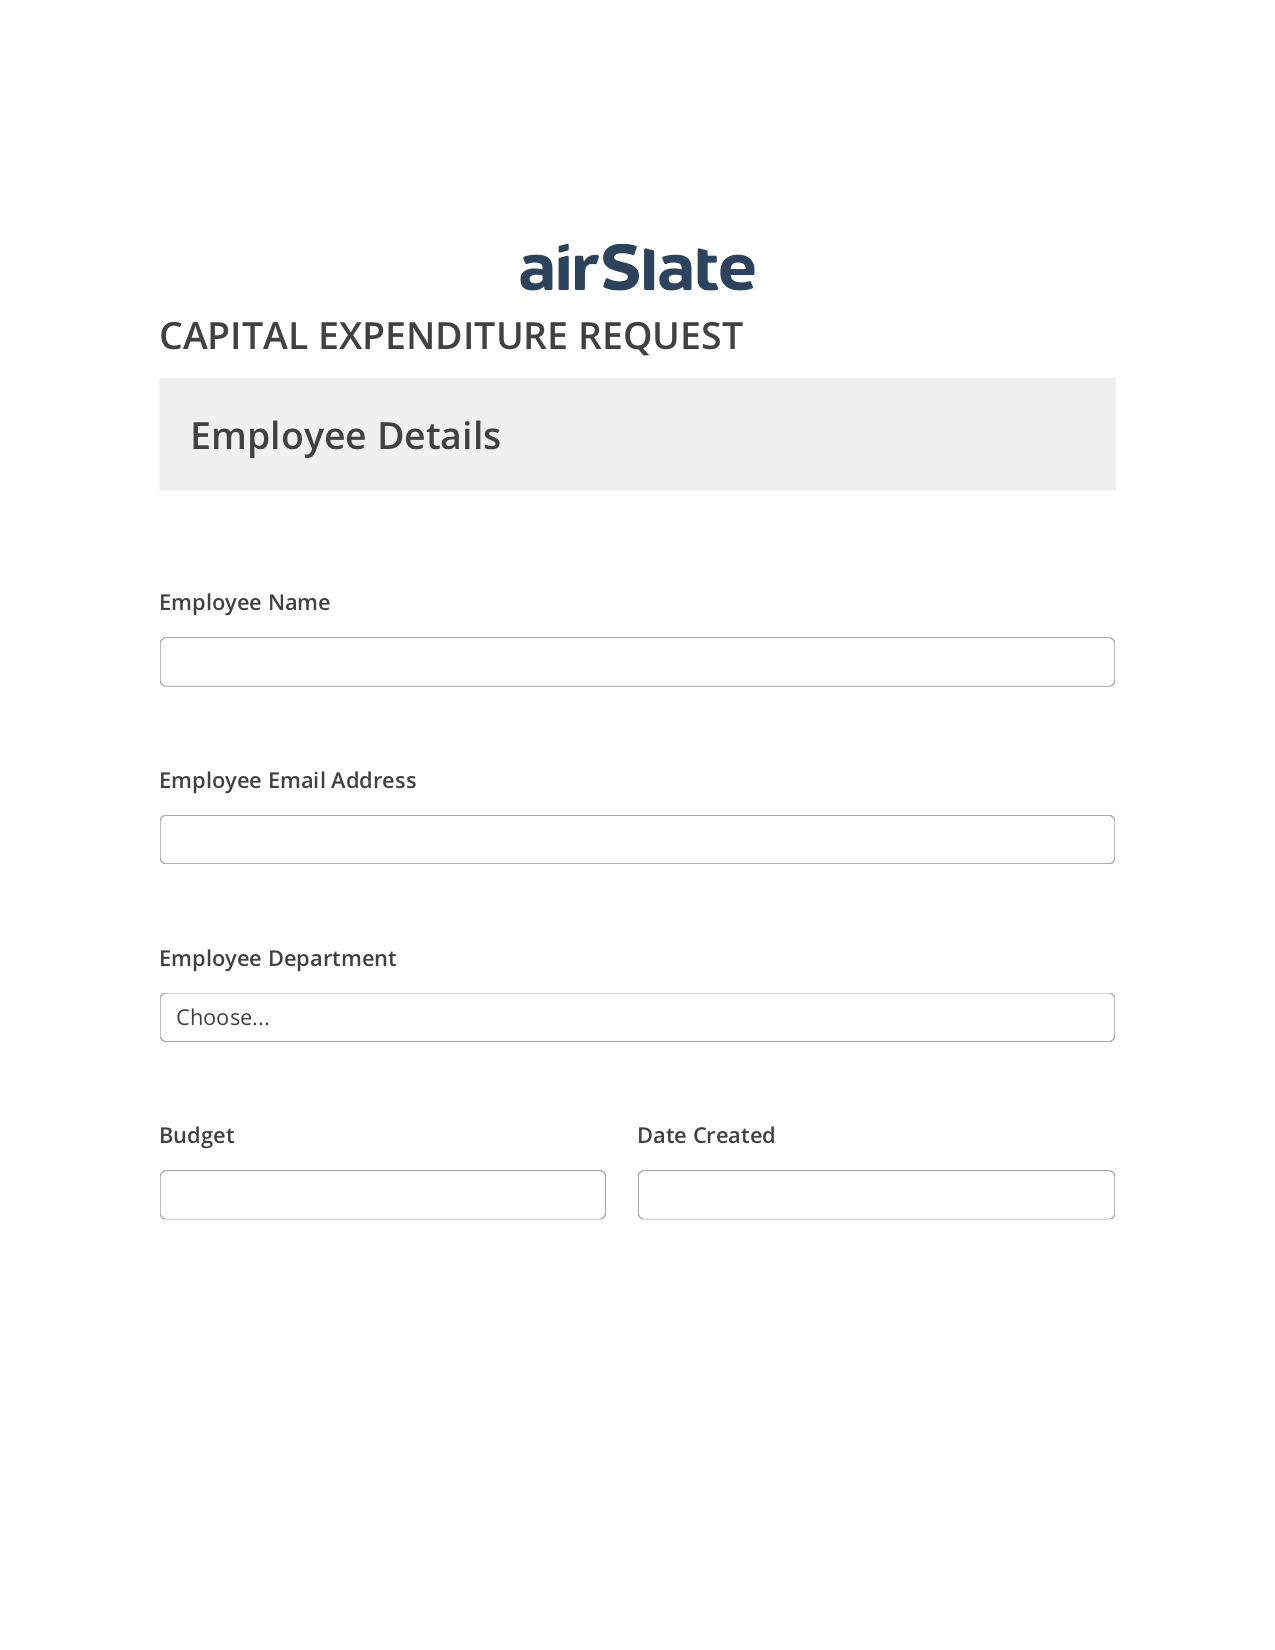 Capital Expenditure Request Approval Workflow Pre-fill from Office 365 Excel Bot, Assign Roles to Recipients Bot, Export to Google Sheet